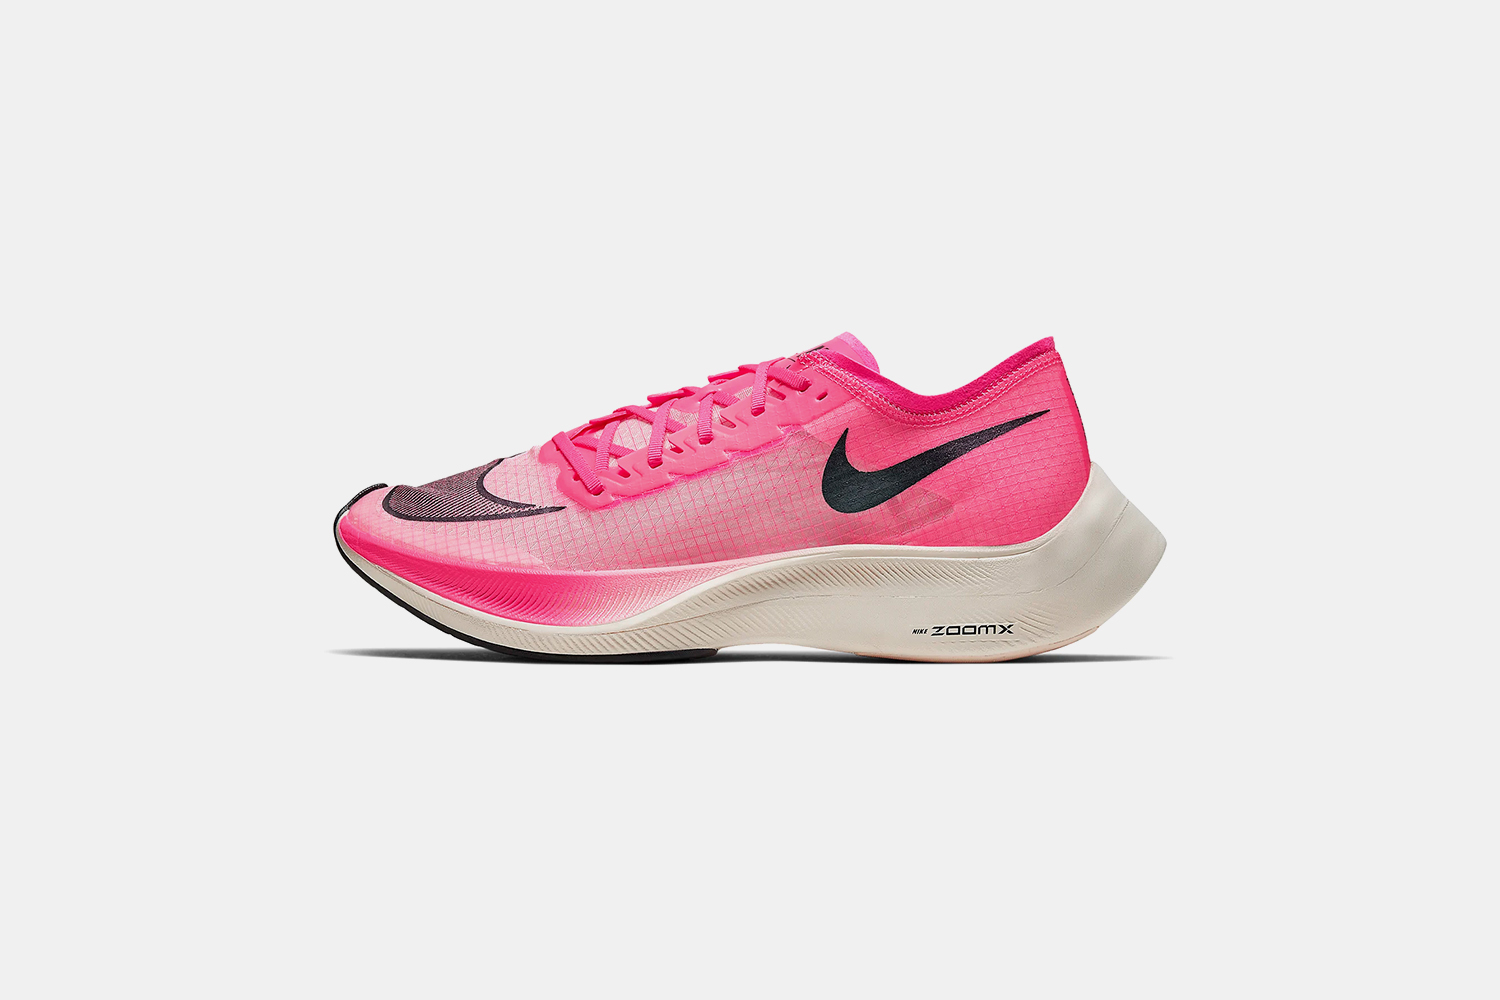 nike's vaporfly running shoes